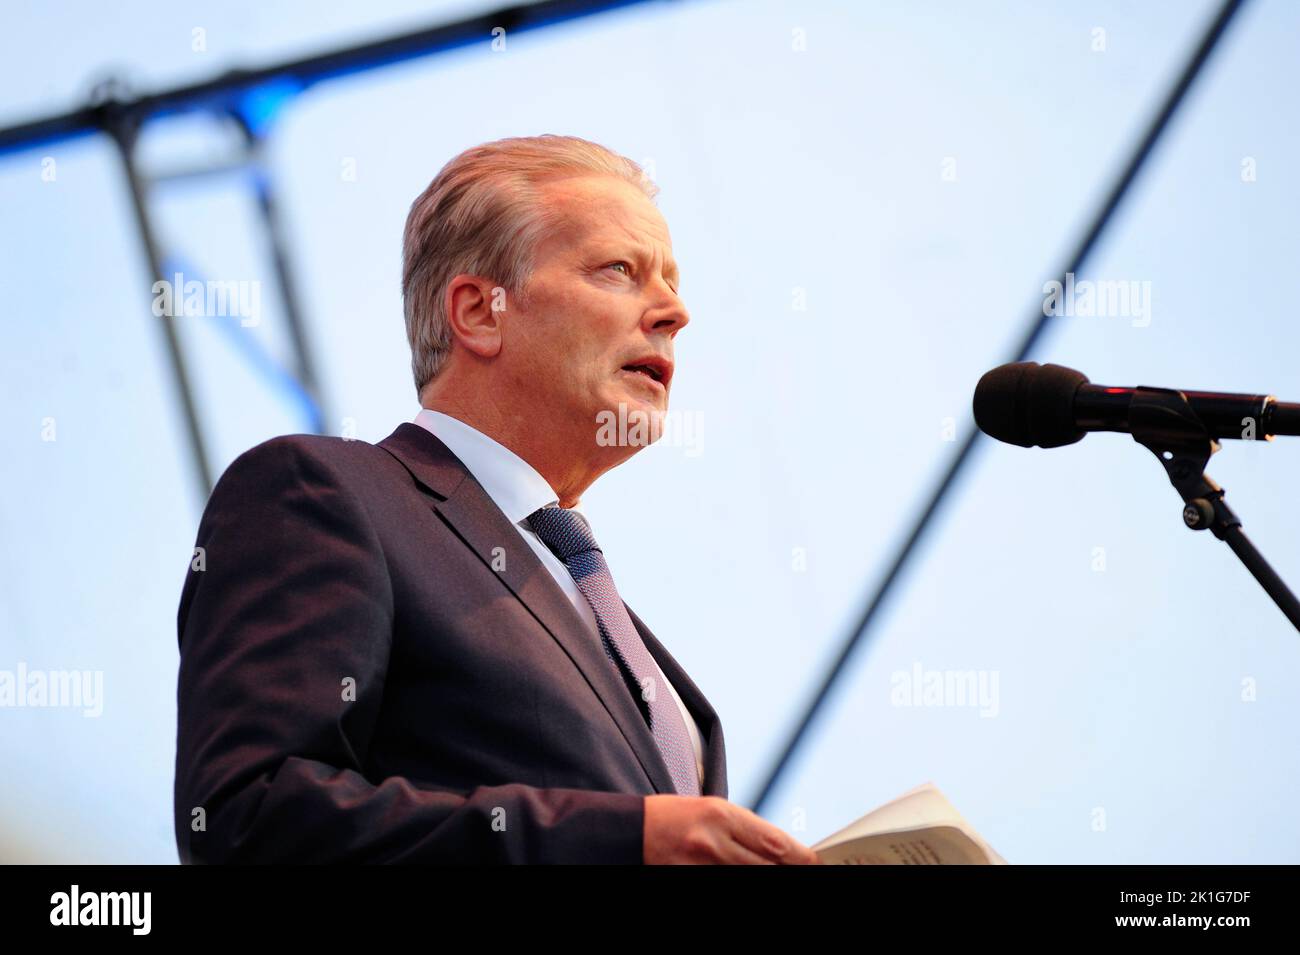 Vienna, Austria. 08 May 2015. Reinhold Mitterlehner (ÖVP-Austrian People's Party) from 2014 to 2017 as Vice Chancellor of the Republic of Austria Stock Photo